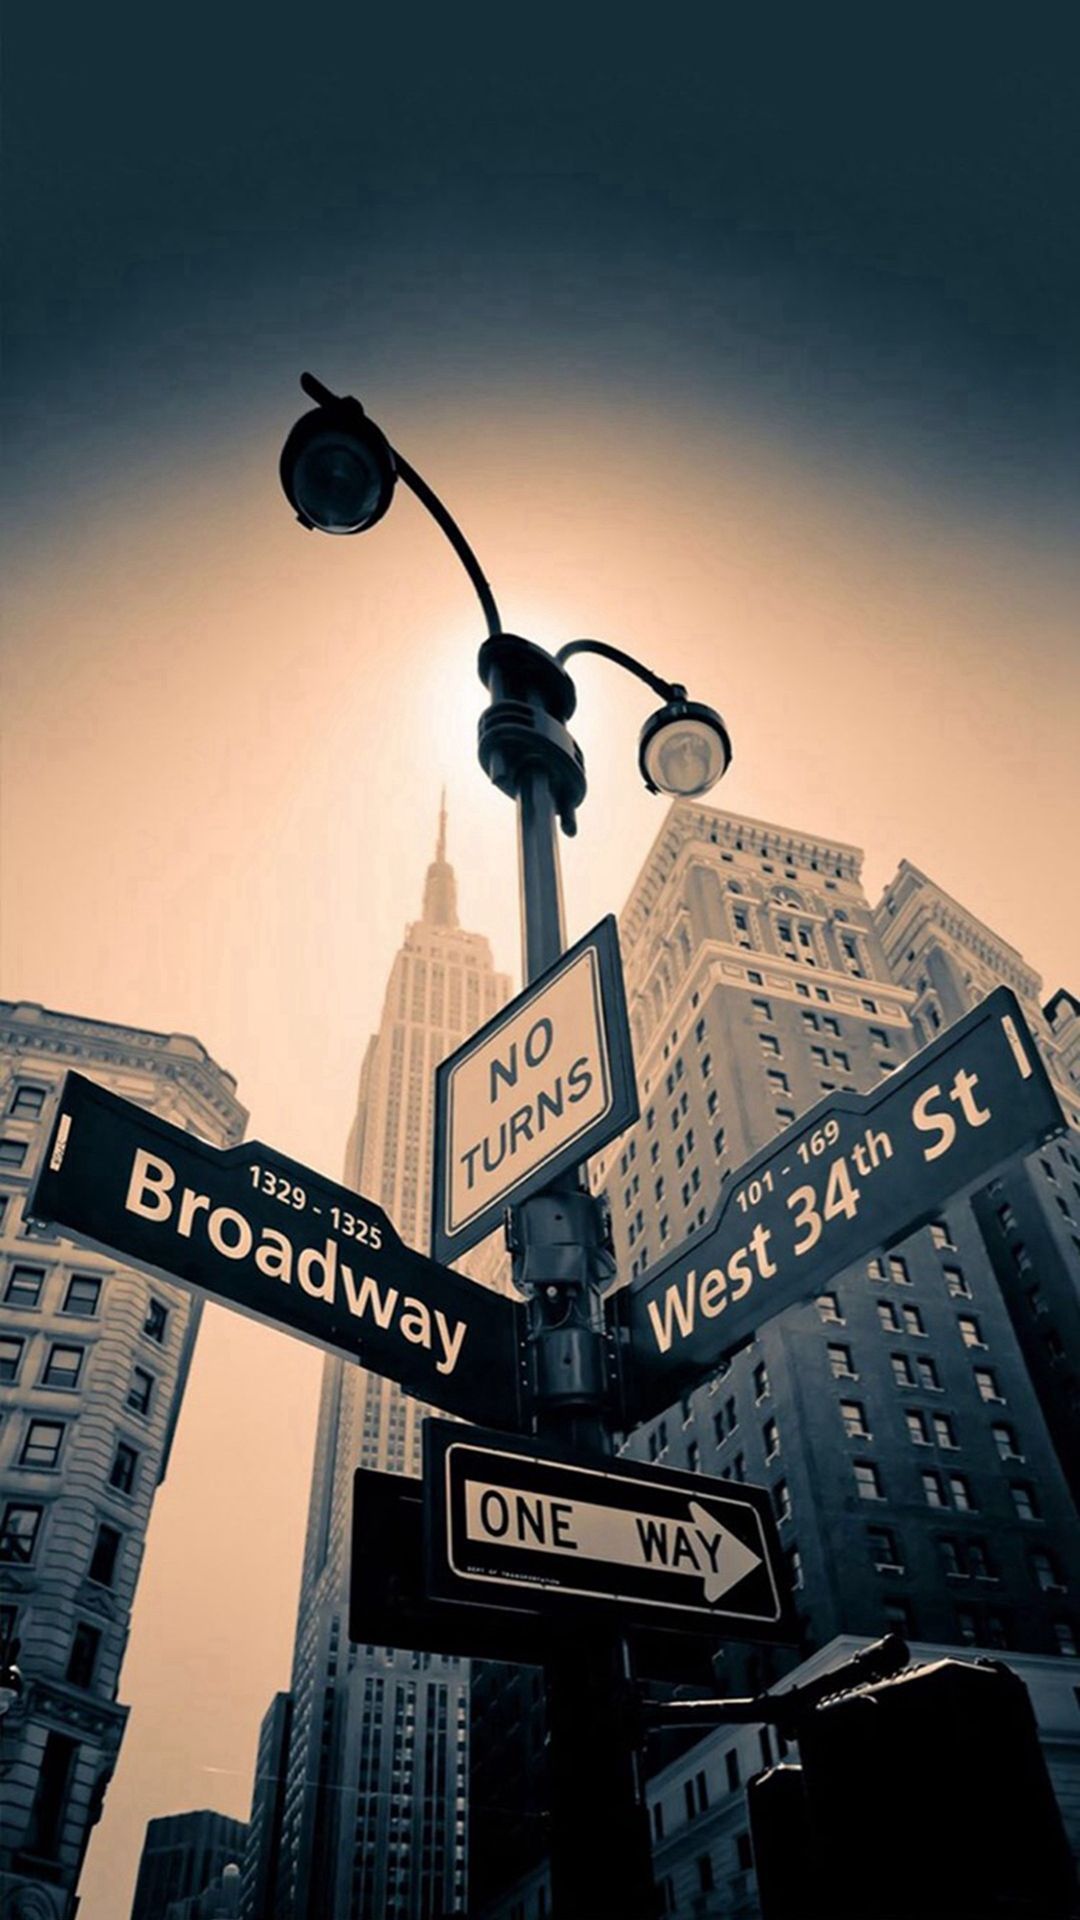 A street sign with Broadway on it - Broadway